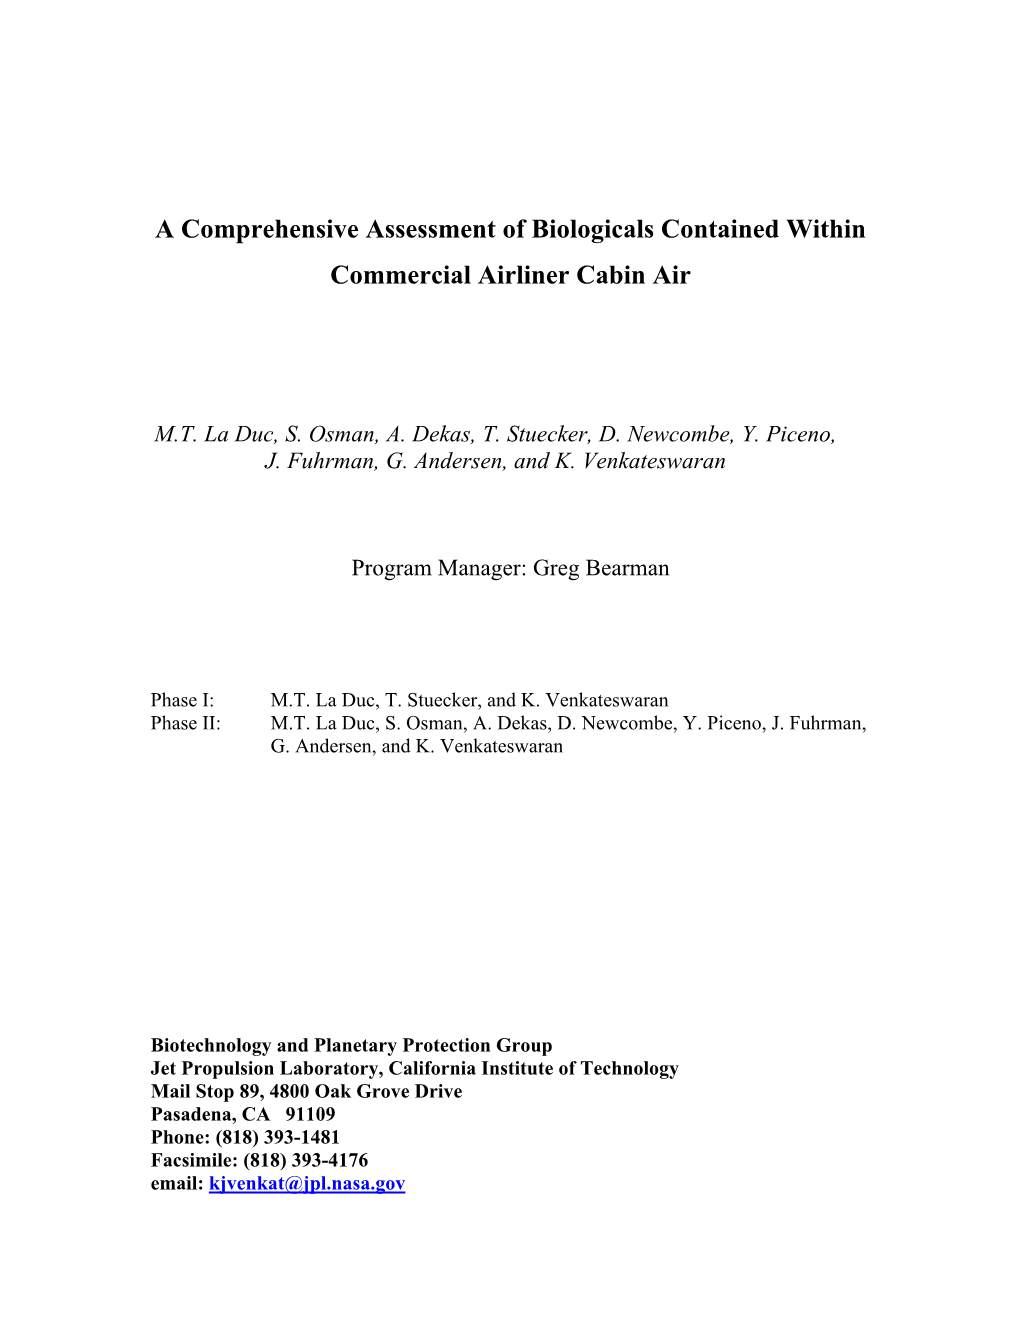 A Comprehensive Assessment of Biologicals Contained Within Commercial Airliner Cabin Air